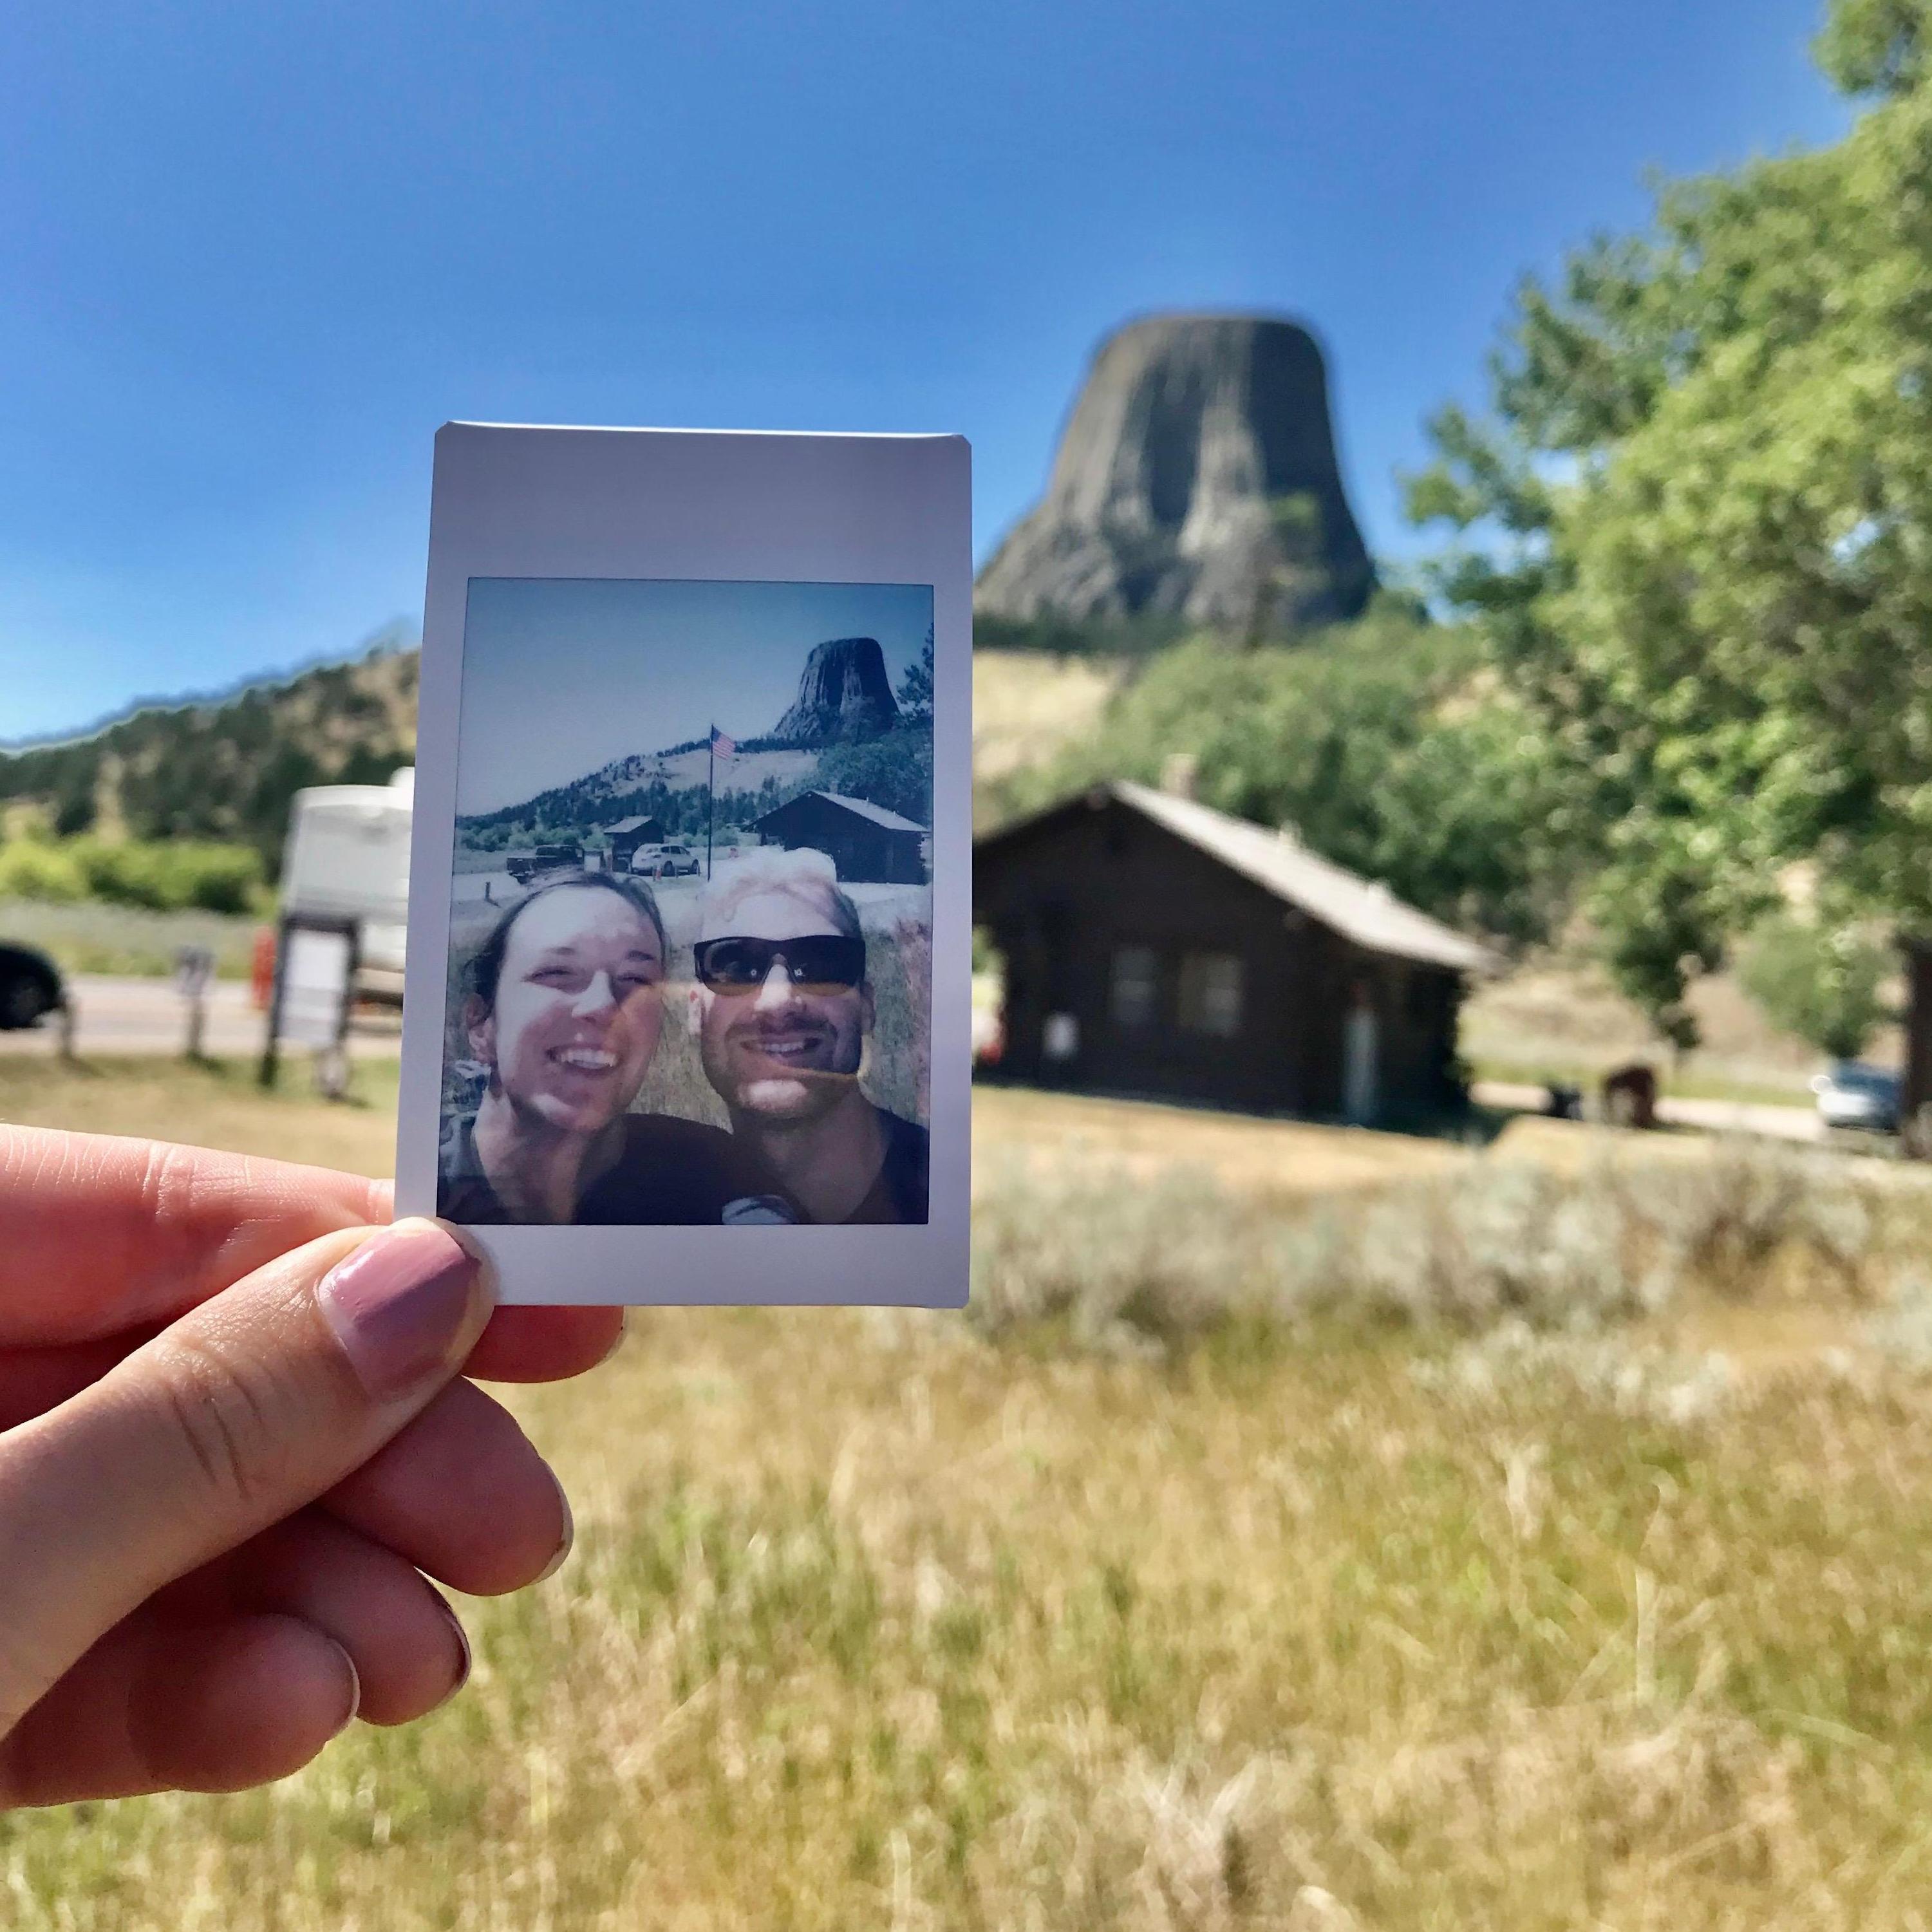 Shan now refers to herself as the "One Shot Wonder" (Devil's Tower)